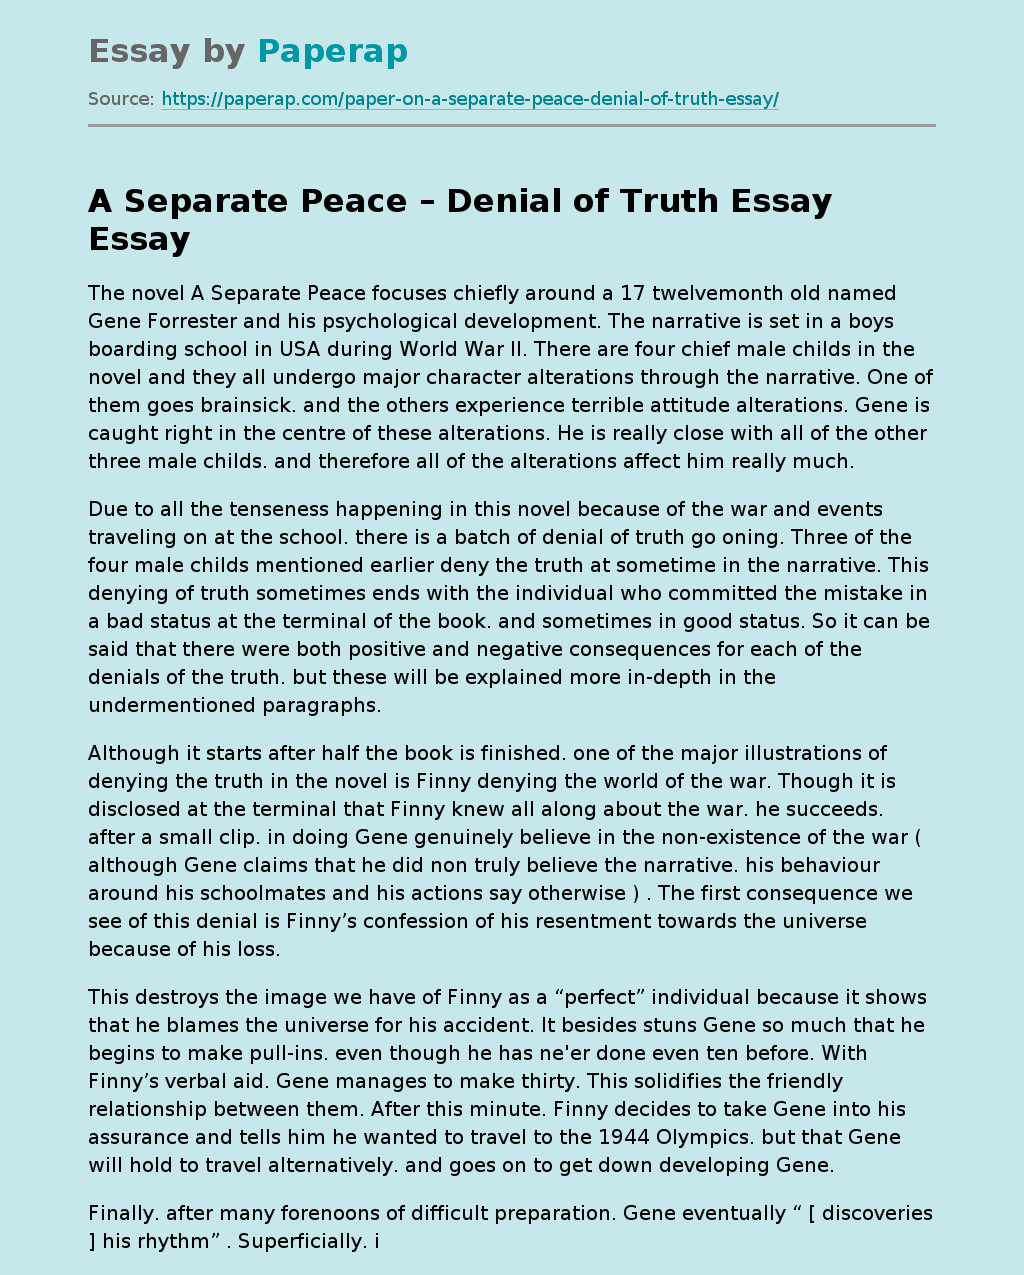 A Separate Peace Is the Denial of Truth